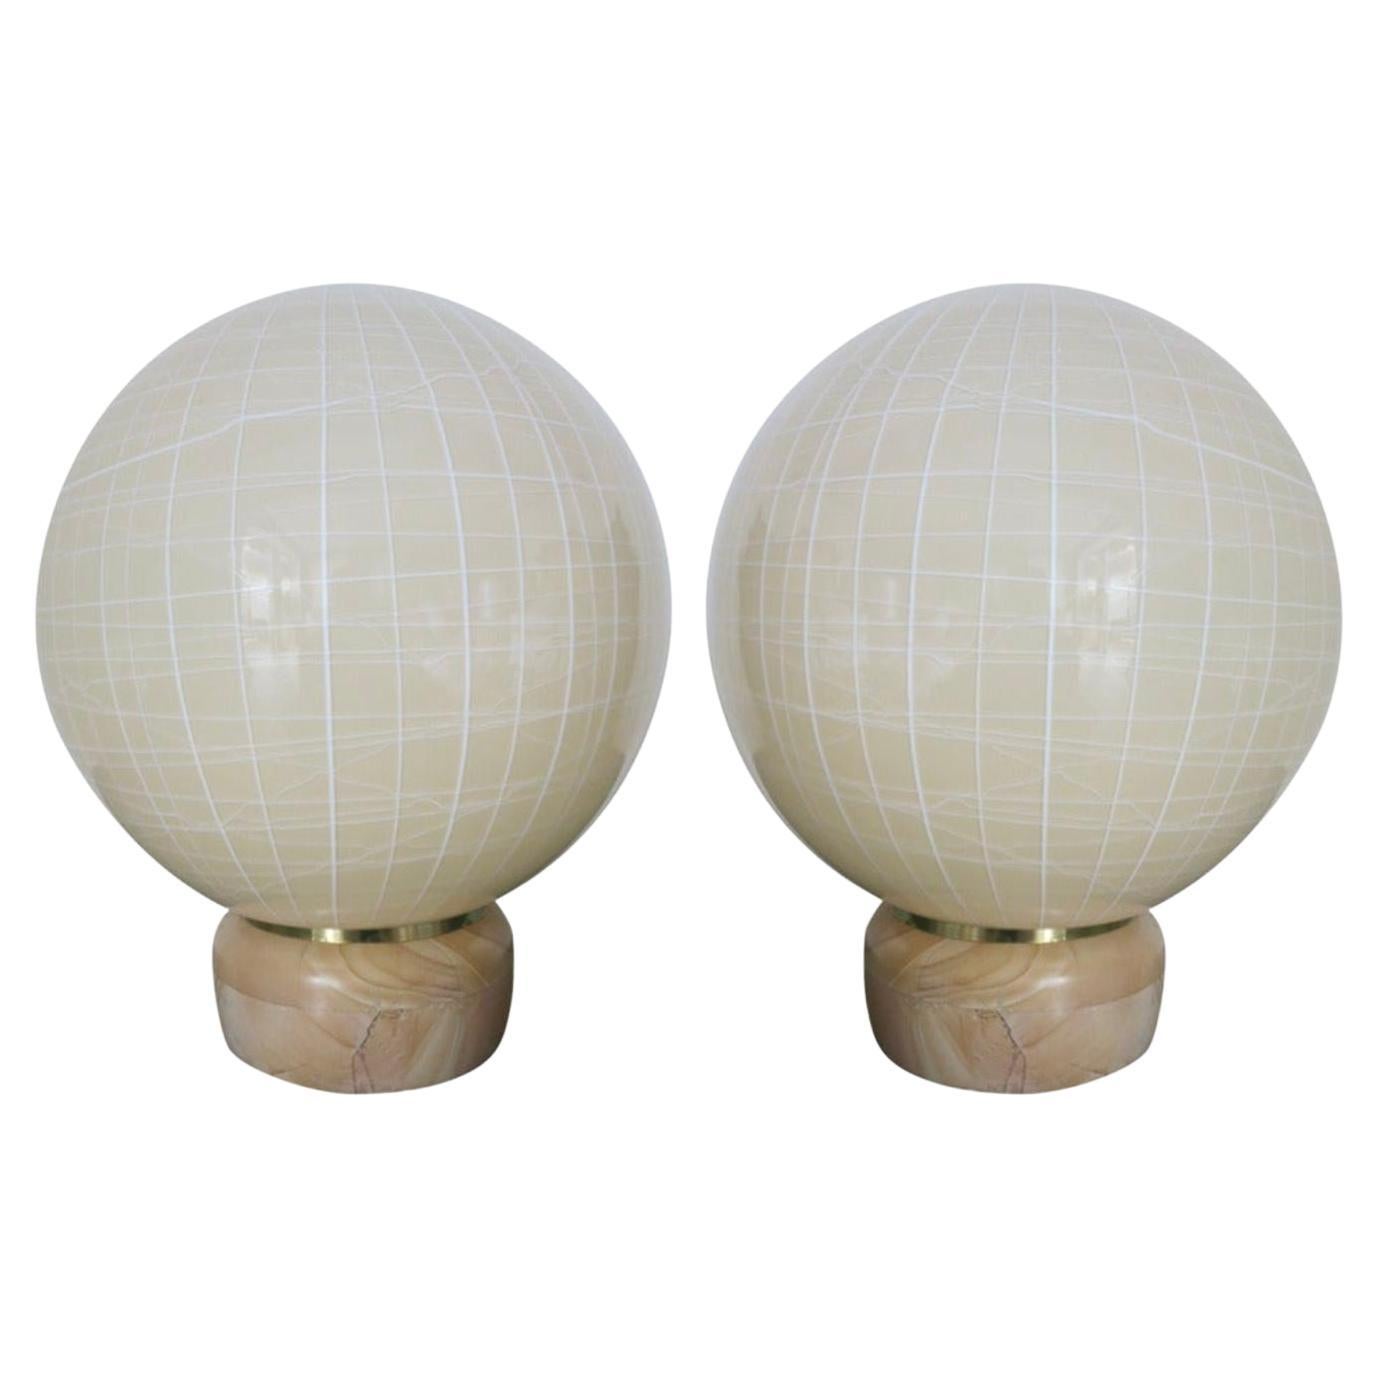 Vintage Pair of Table Lamps w/ Beige Murano Glass Designed by Venini, 1960s